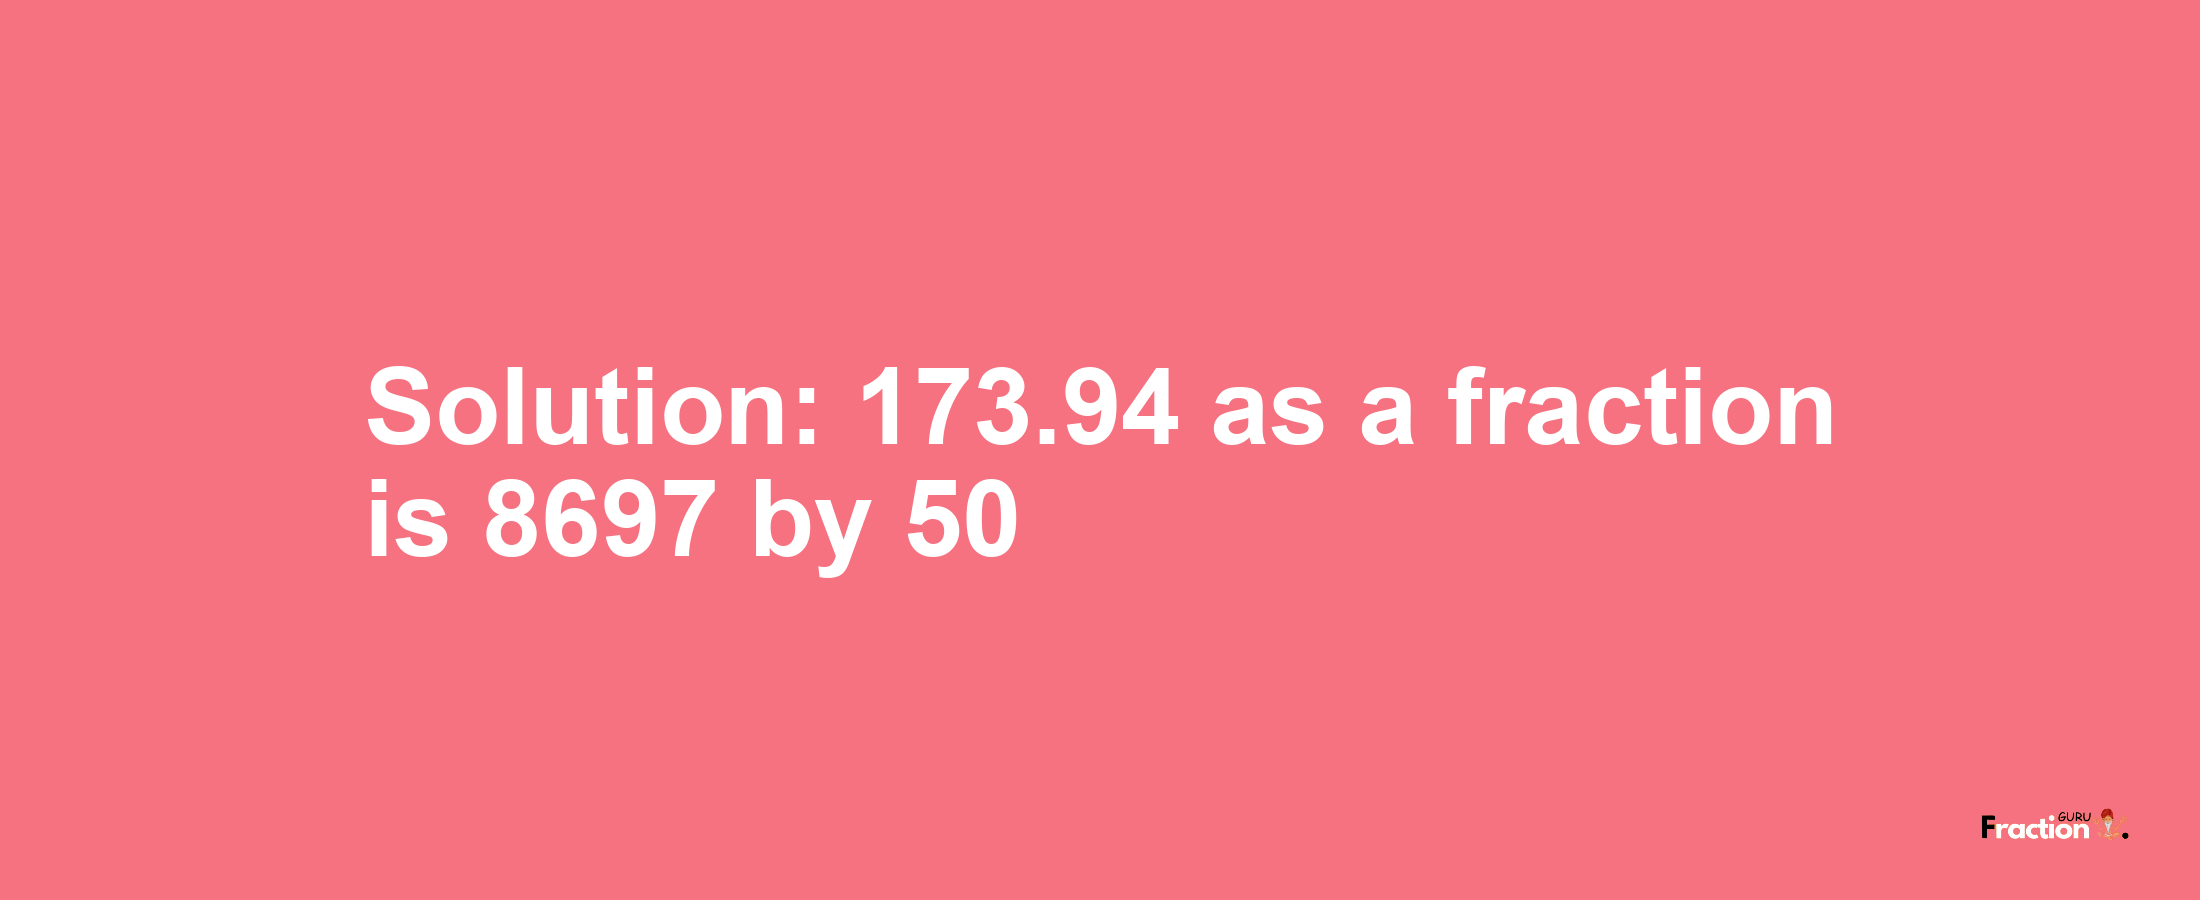 Solution:173.94 as a fraction is 8697/50